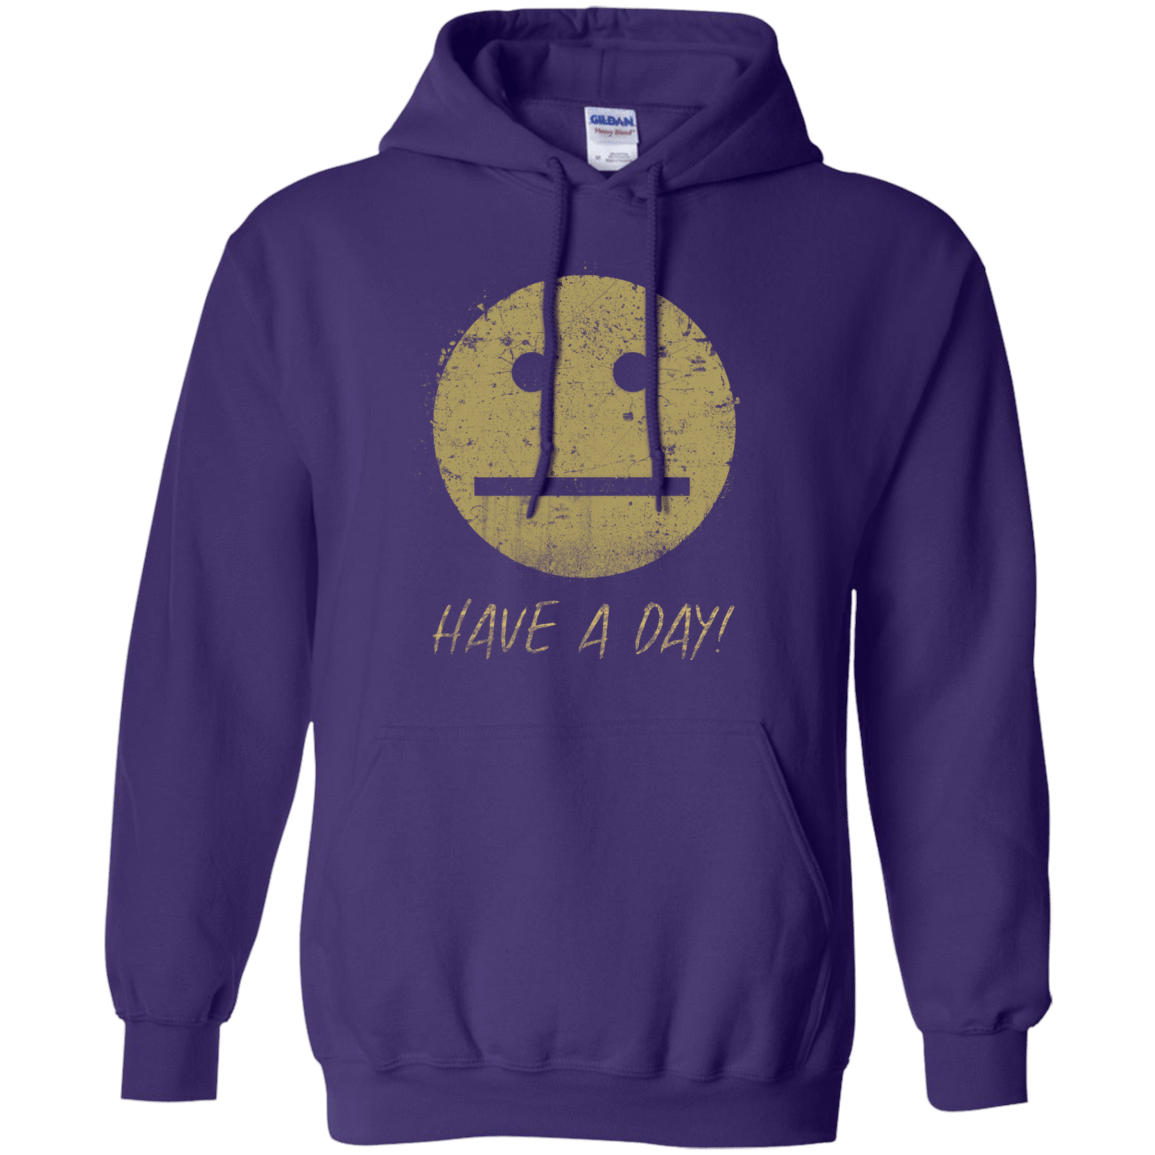 Sweatshirts Purple / Small Have A Day Pullover Hoodie